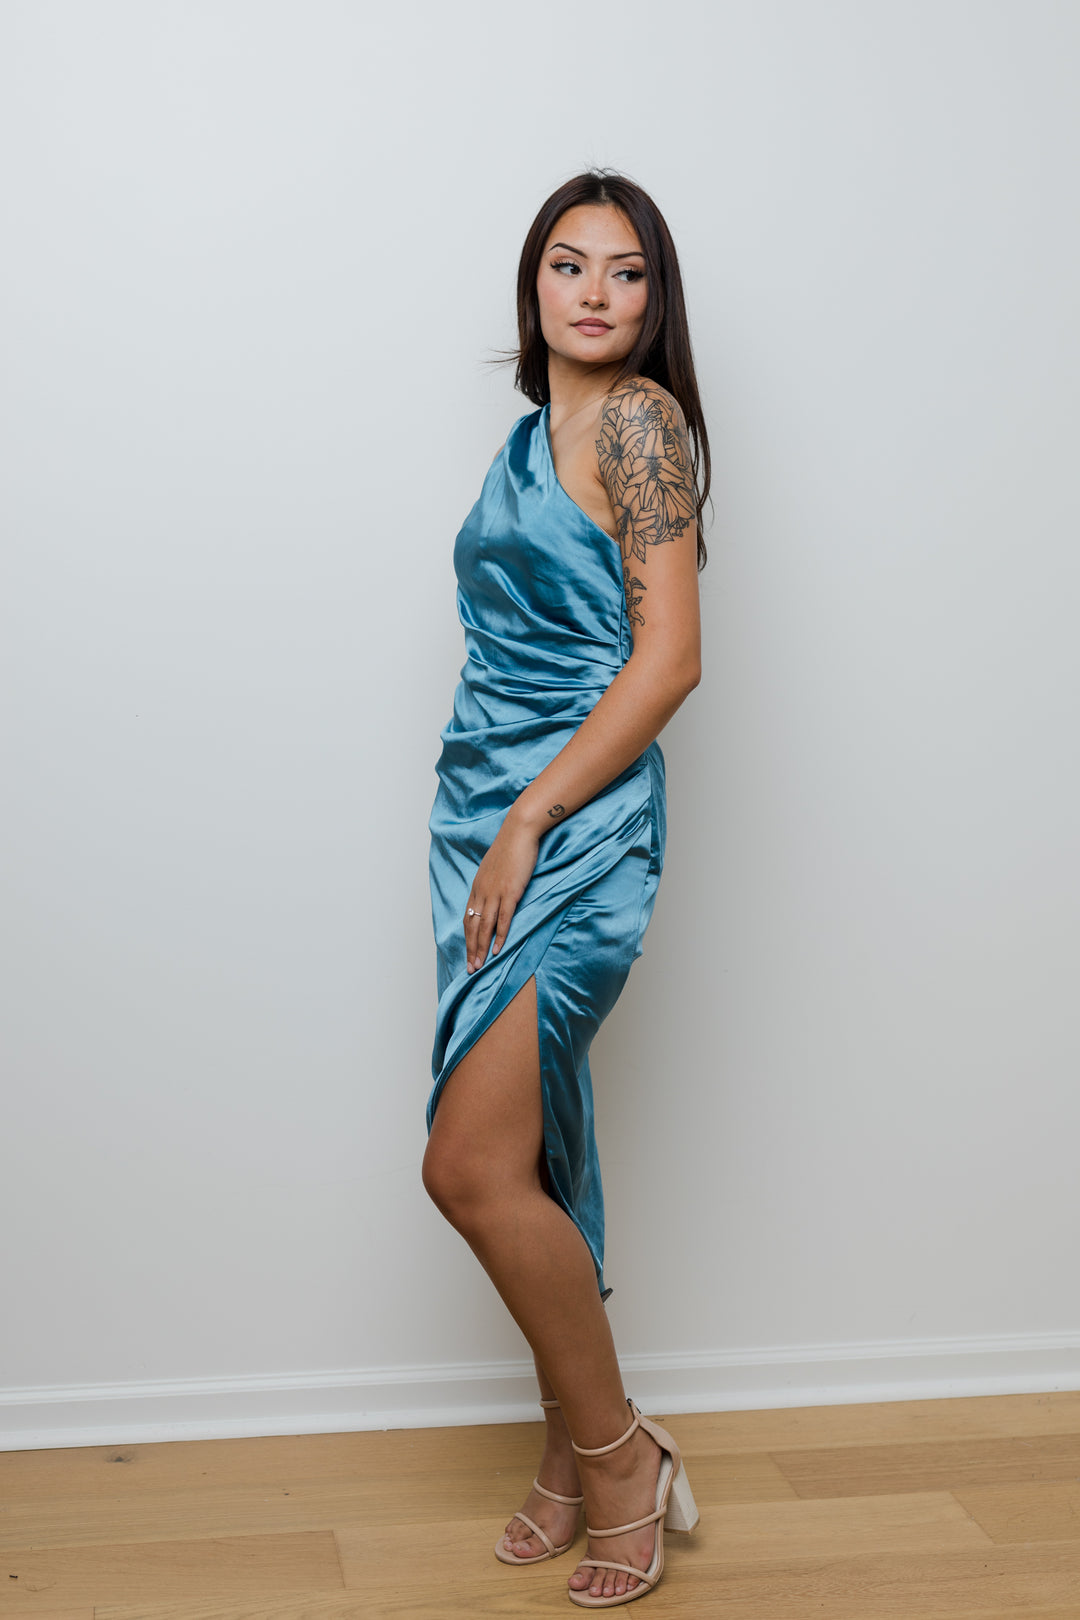 The Wedding Guest Satin Ruched Midi Dress